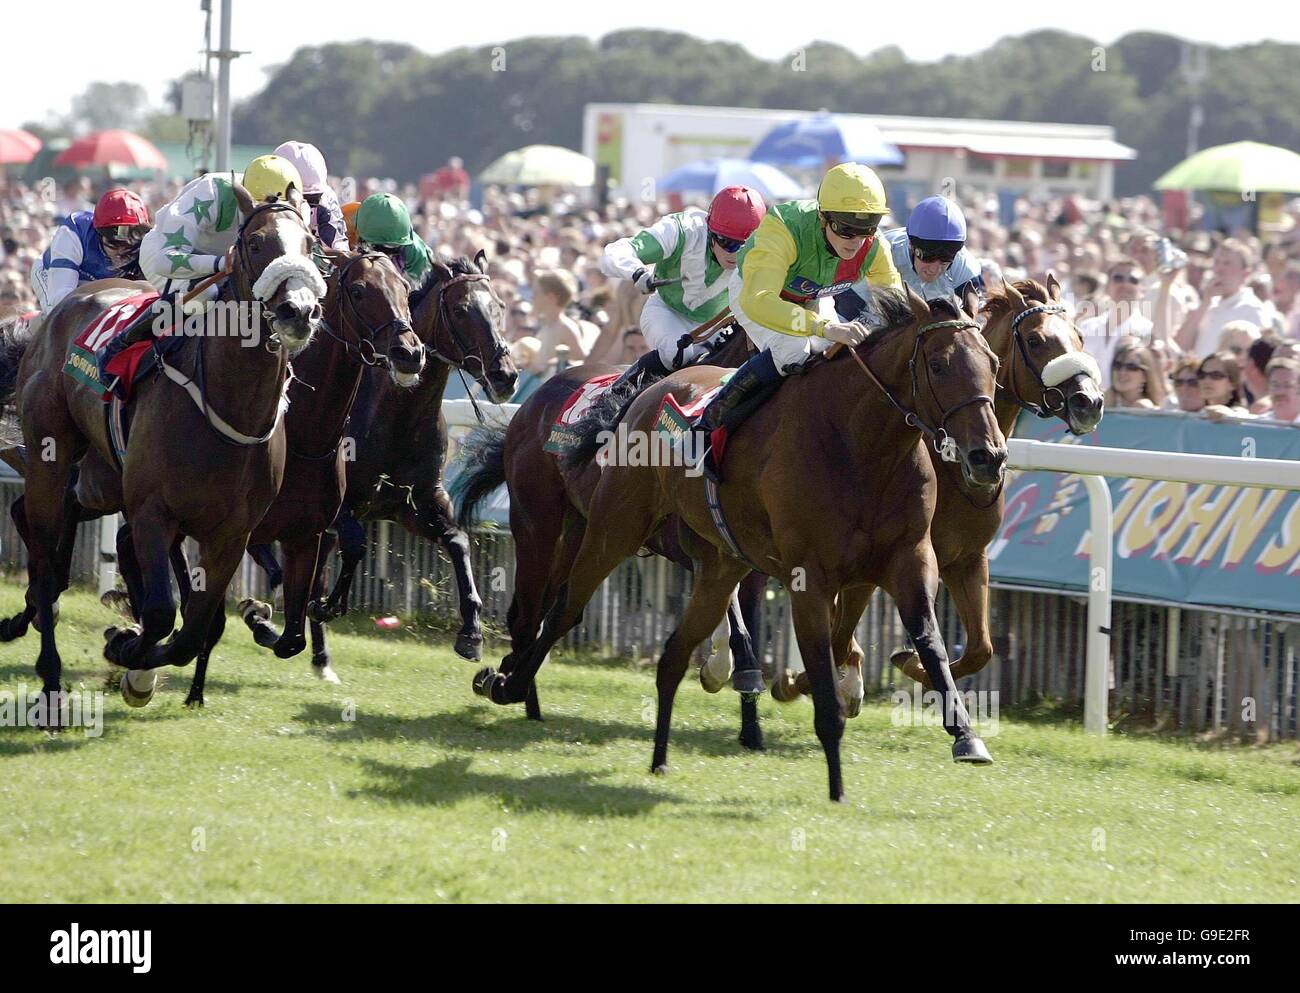 Fairmile, ridden by Alan Kirby (second from right) goes on to win the John Smith's Cup Heritage Handicap at York Racecourse. Stock Photo